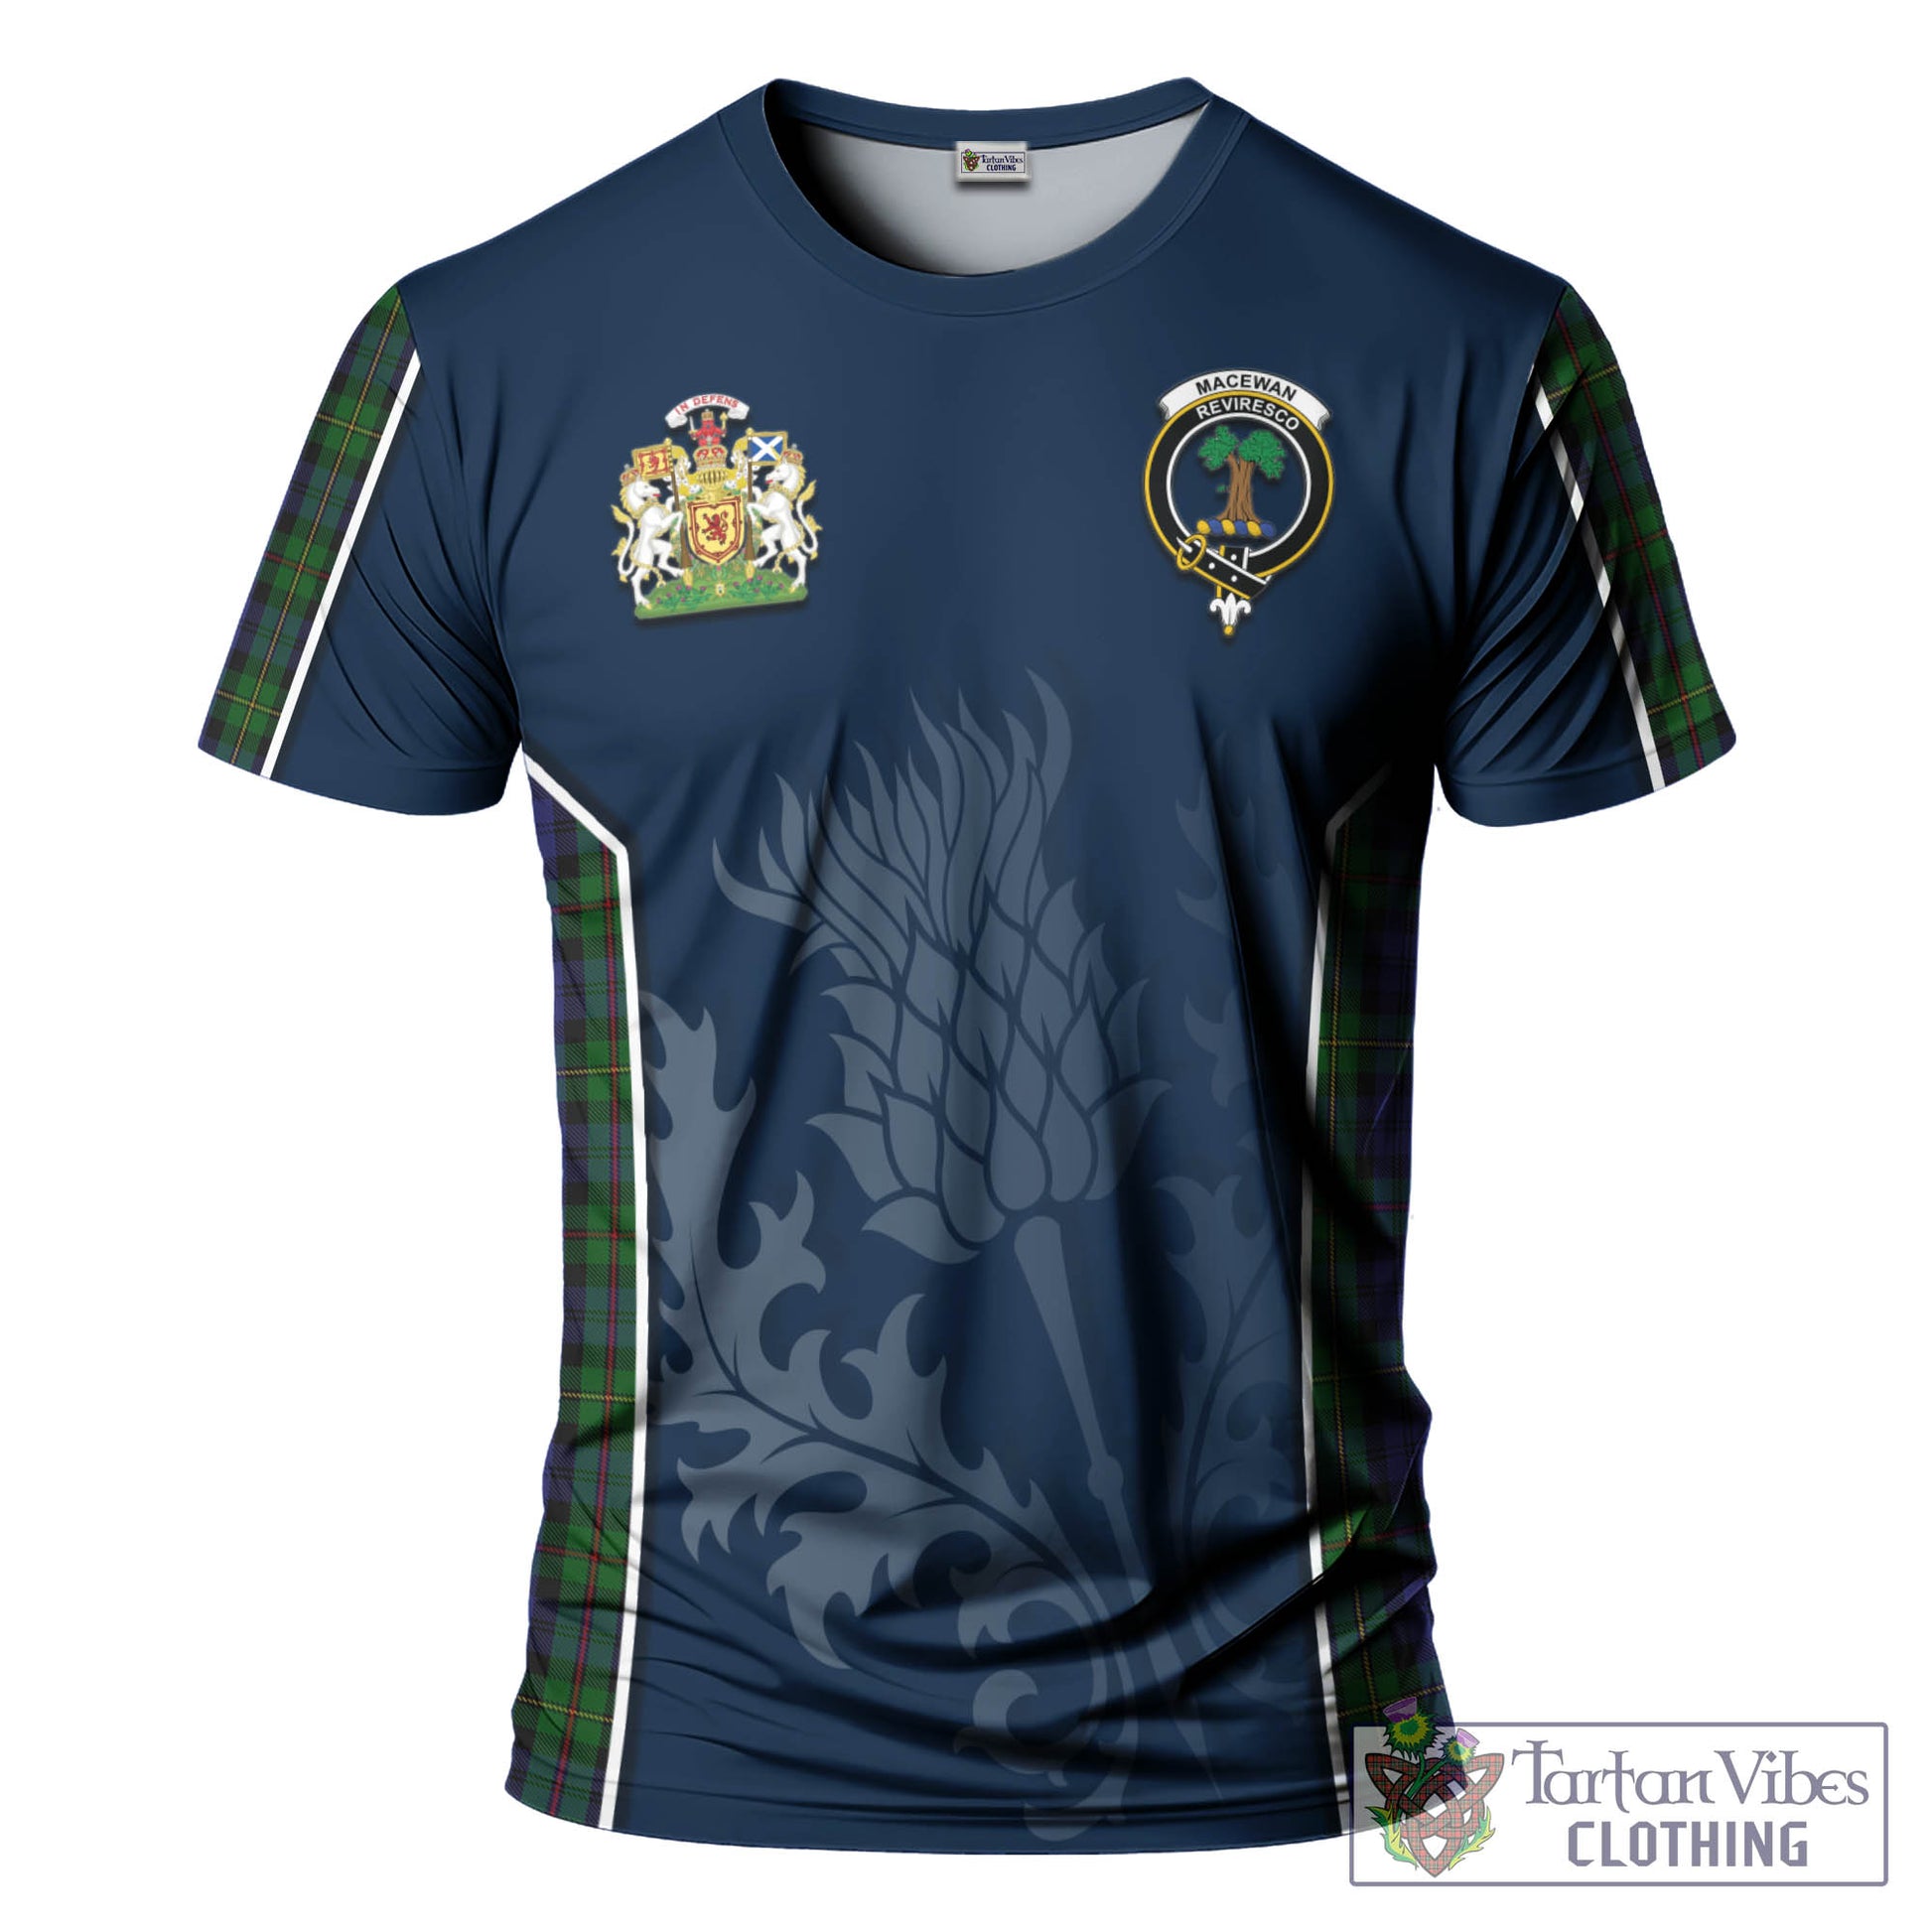 Tartan Vibes Clothing MacEwan Tartan T-Shirt with Family Crest and Scottish Thistle Vibes Sport Style